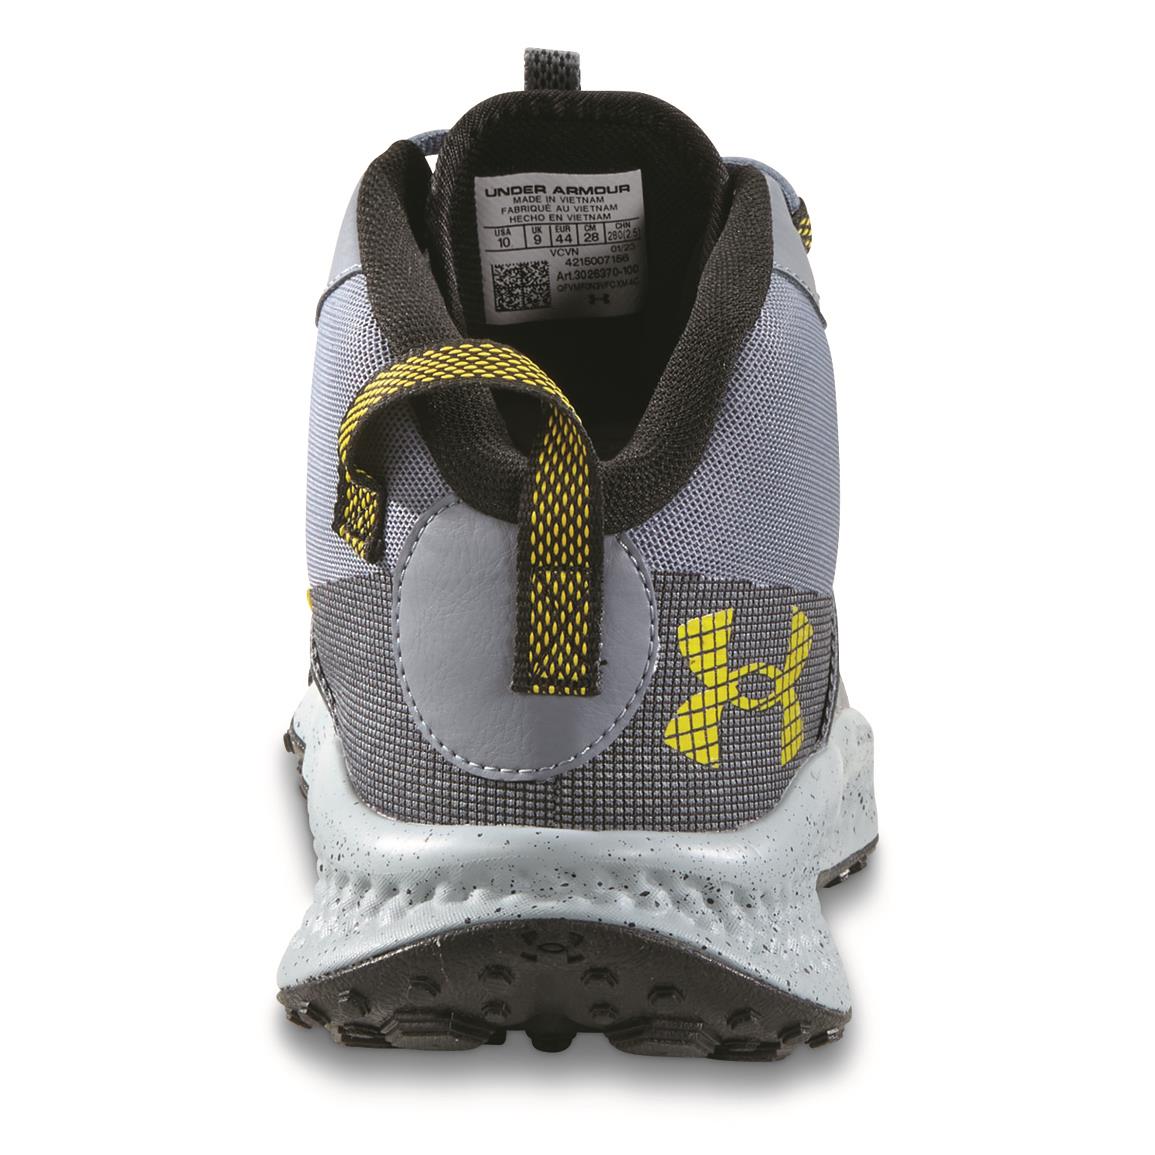 Under Armour Hiking Shoes | Sportsman's Guide